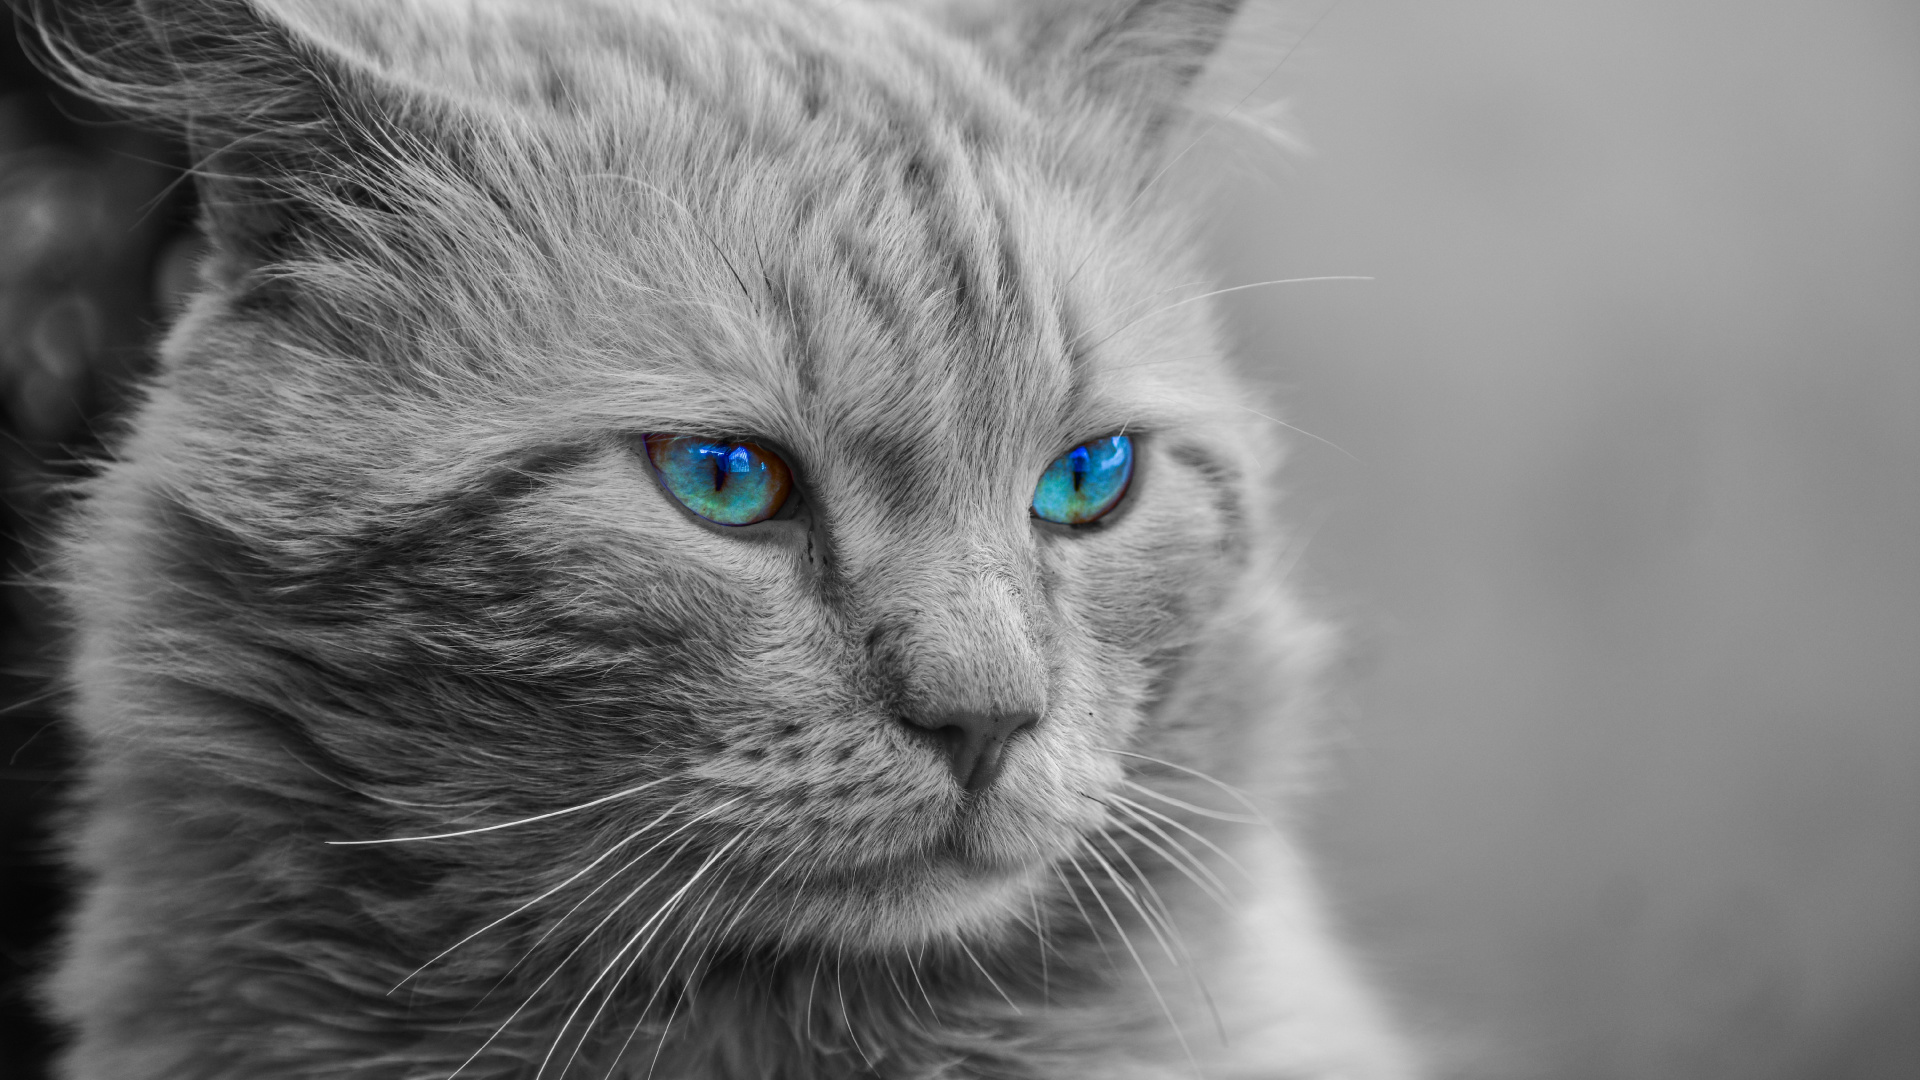 Grayscale Photo of Cat With Blue Eyes. Wallpaper in 1920x1080 Resolution